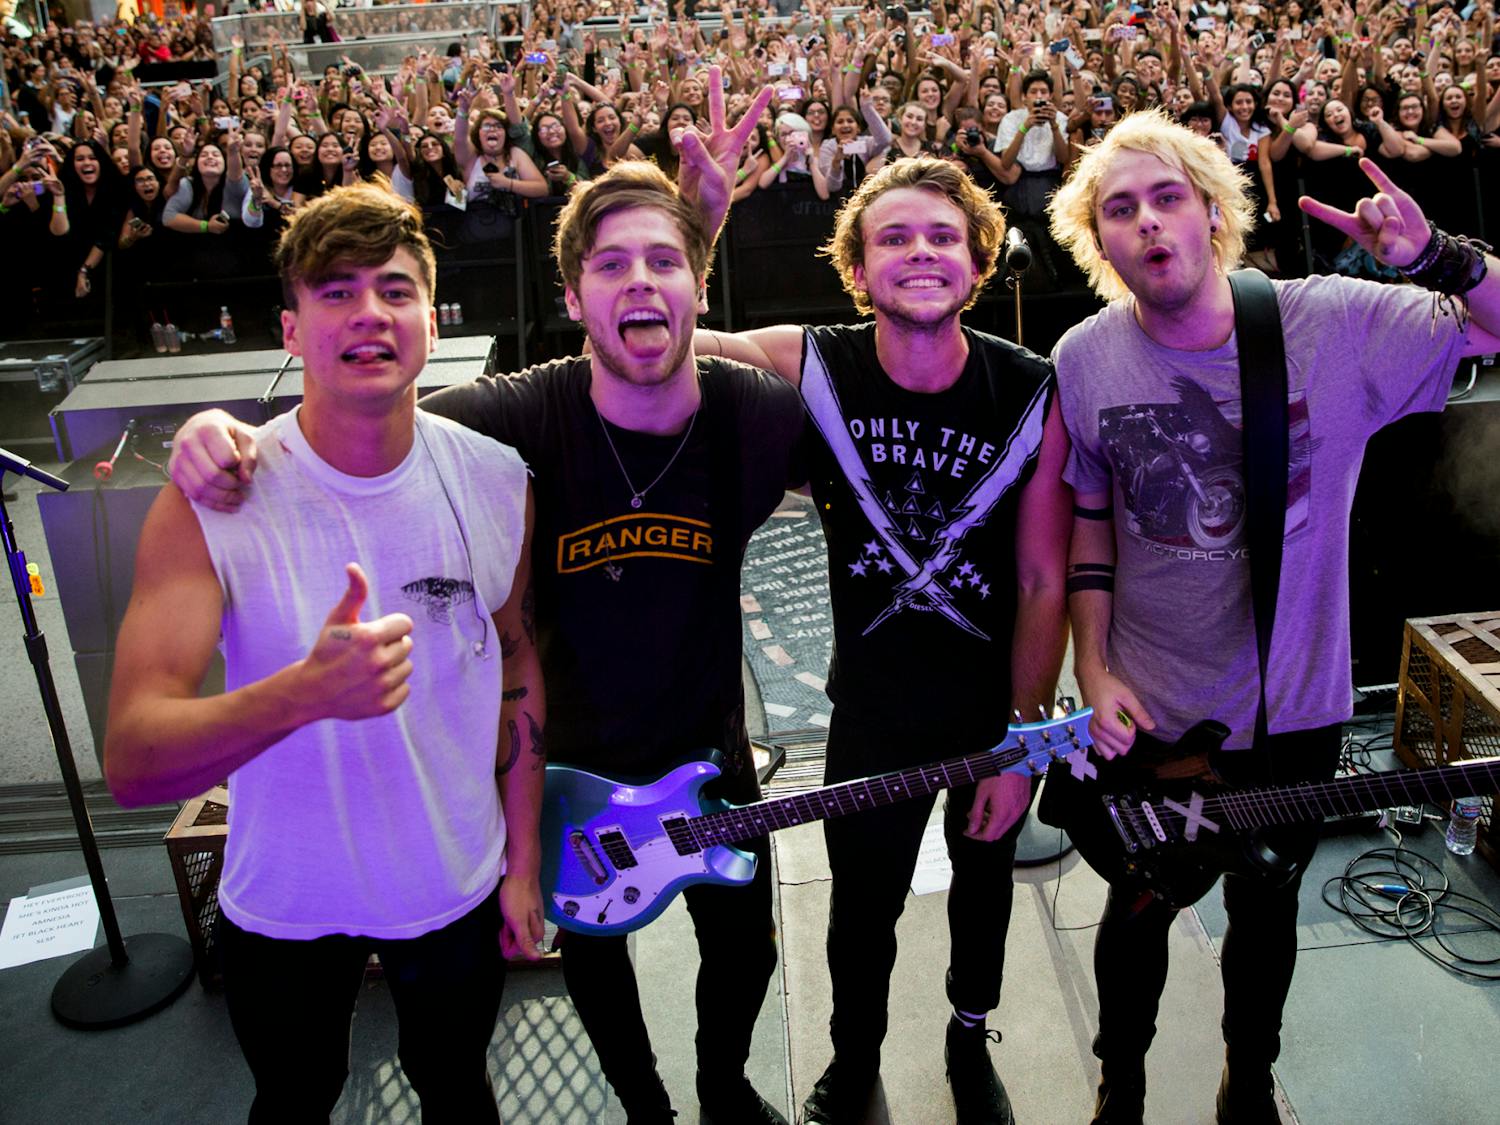 Australian pop band 5 Seconds of Summer members, from left, Calum Hood, Luke Hemmings, Ashton Irwin and Michael Clifford, following their performance at Hollywood & Highland Center on Oct. 23, 2015, in Hollywood, California. The group released their fifth album, 5SOS5, on Sept. 23, 2022. (Jay L. Clendenin/Los Angeles Times/TNS)